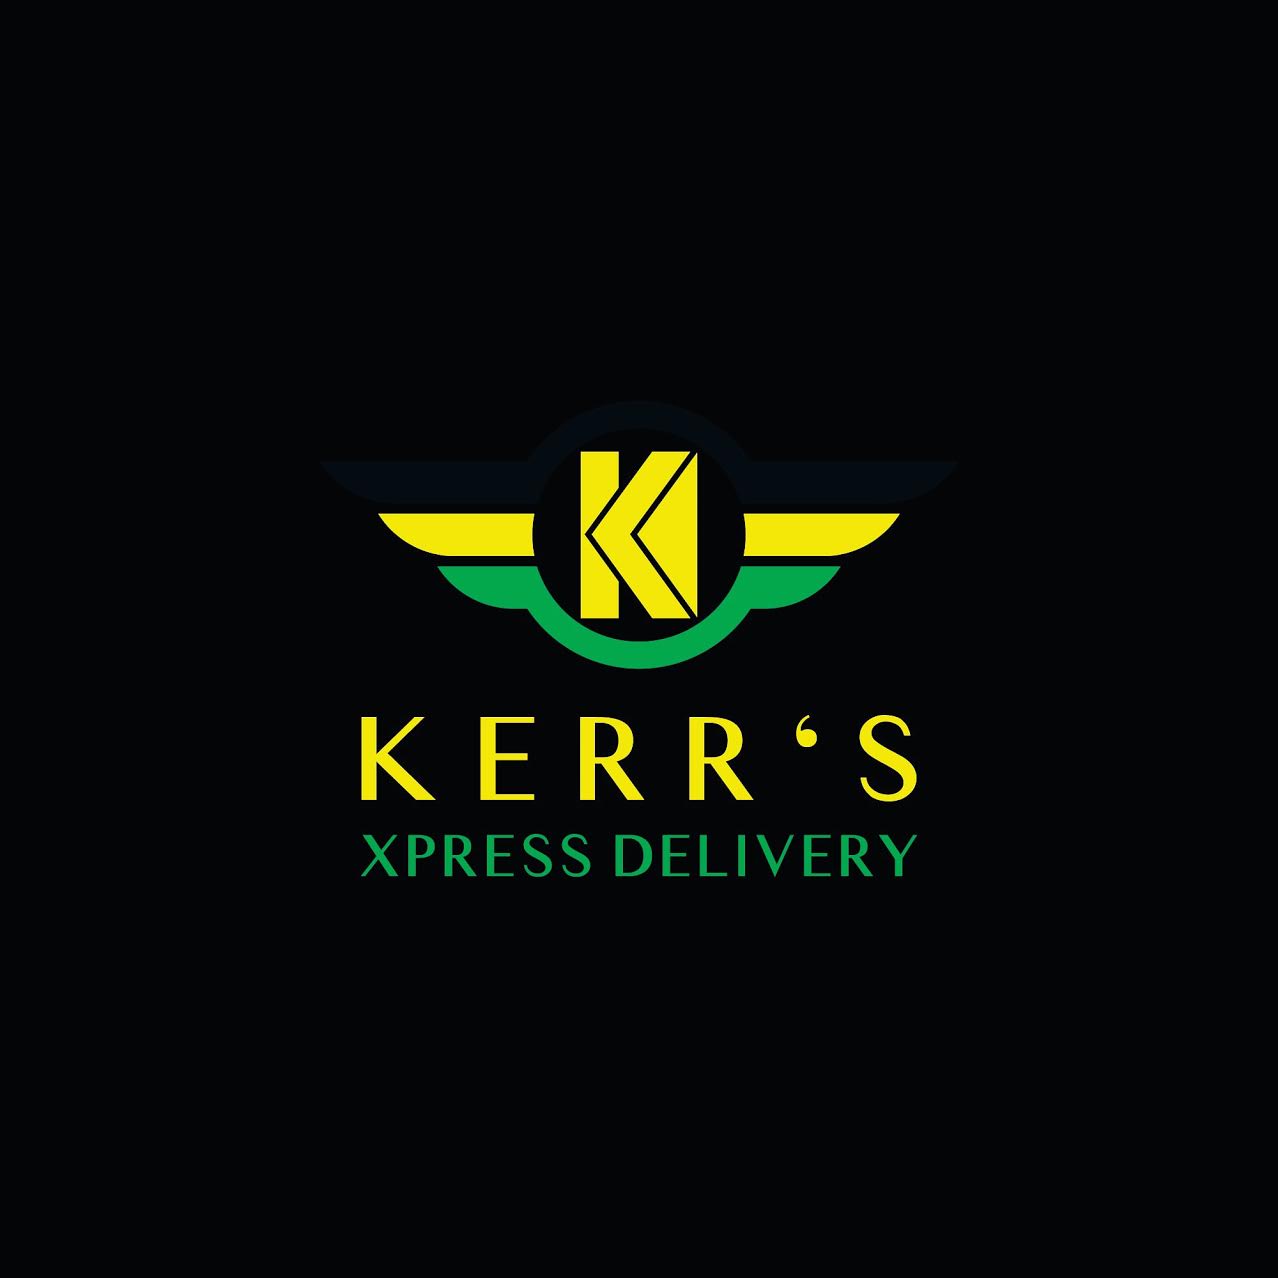 Kerr’s Xpress Delivery